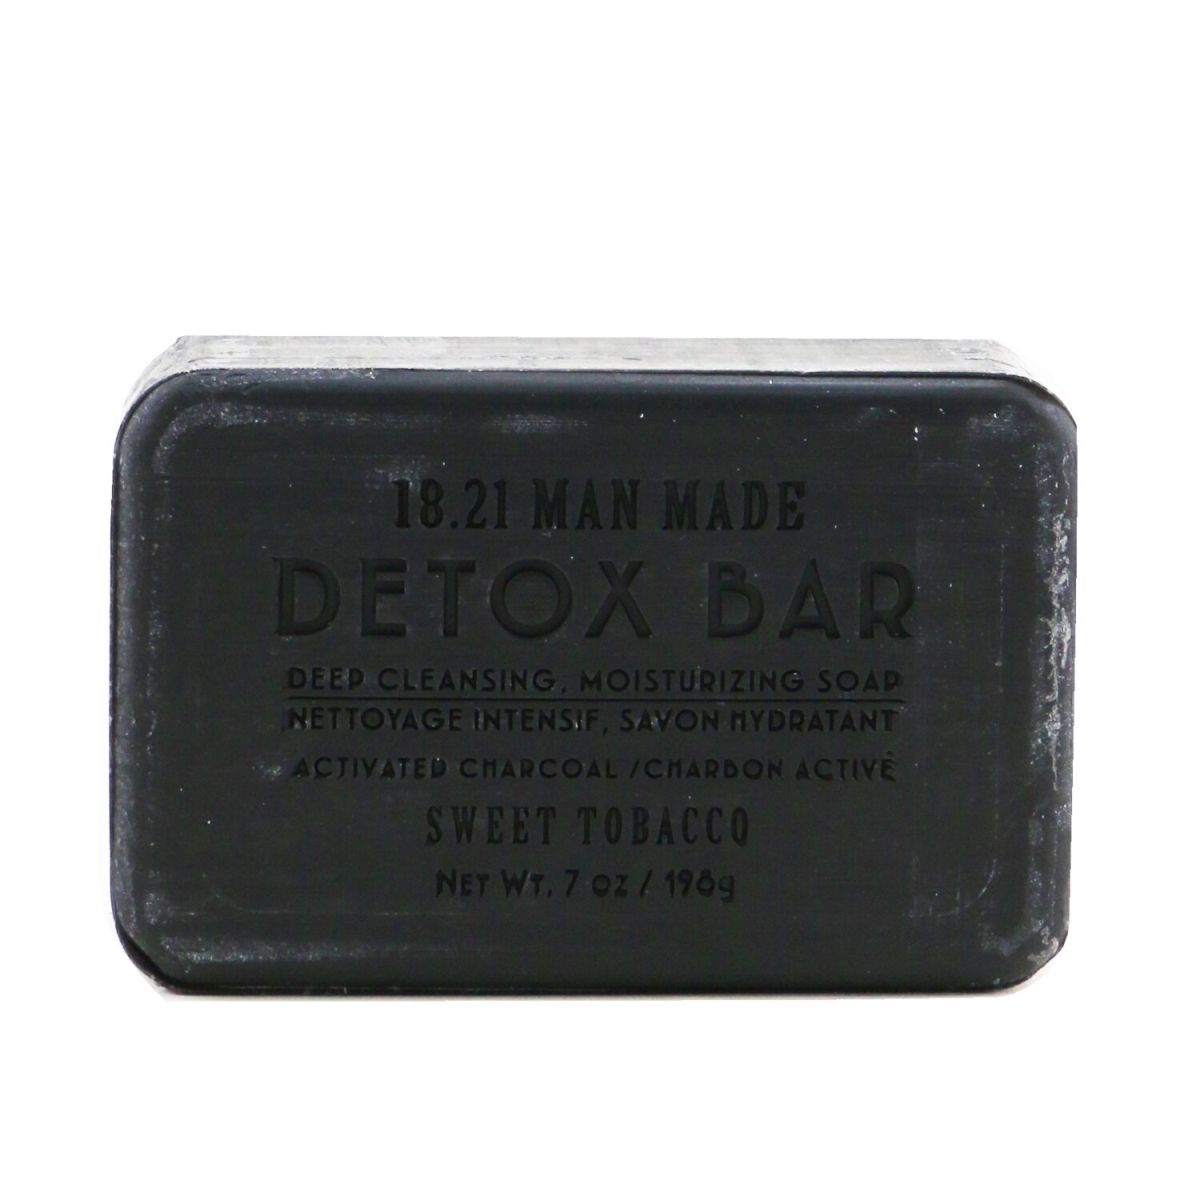 Picture of 18.21 Man Made 262763 7 oz Detox Bar & Deep Cleansing&#44; Sweet Tobacco Moisturizing Soap -